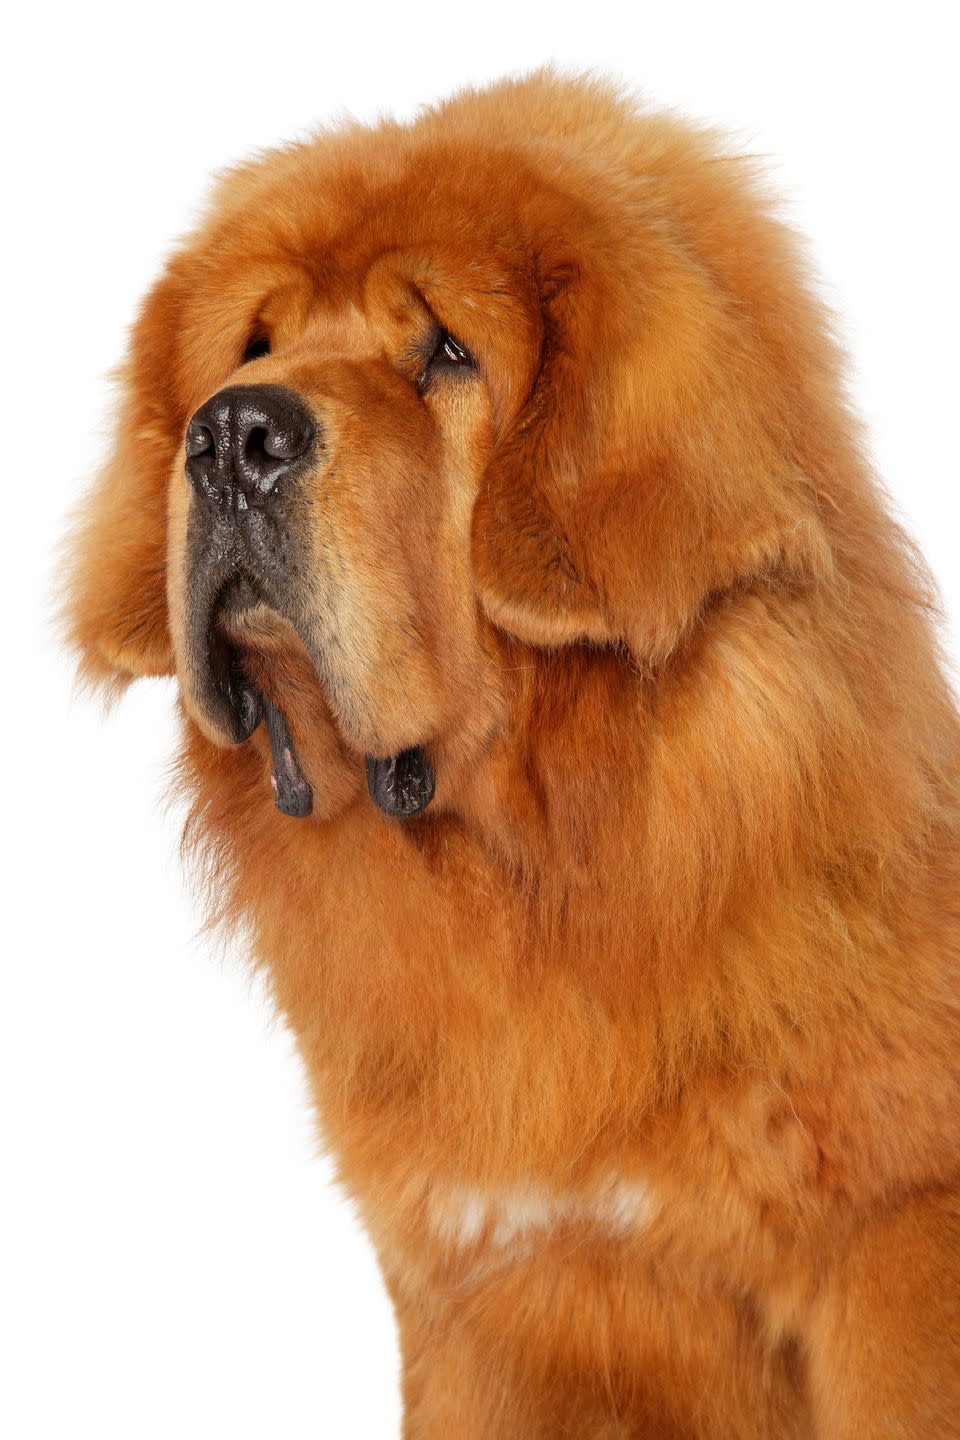 <p>Not much is known about the origins of this dog, other than it has been the guardian of the Himalayas for thousands of years. Of imposing size and bulk (they can reach 26 inches tall and more than 100 pounds), with a strength to match, Tibetan mastiffs have a serene, but sweet attitude when with family members. They "blow out" their coats annually in a major shedding session, but the rest of the year only need to brushed once a week.</p>